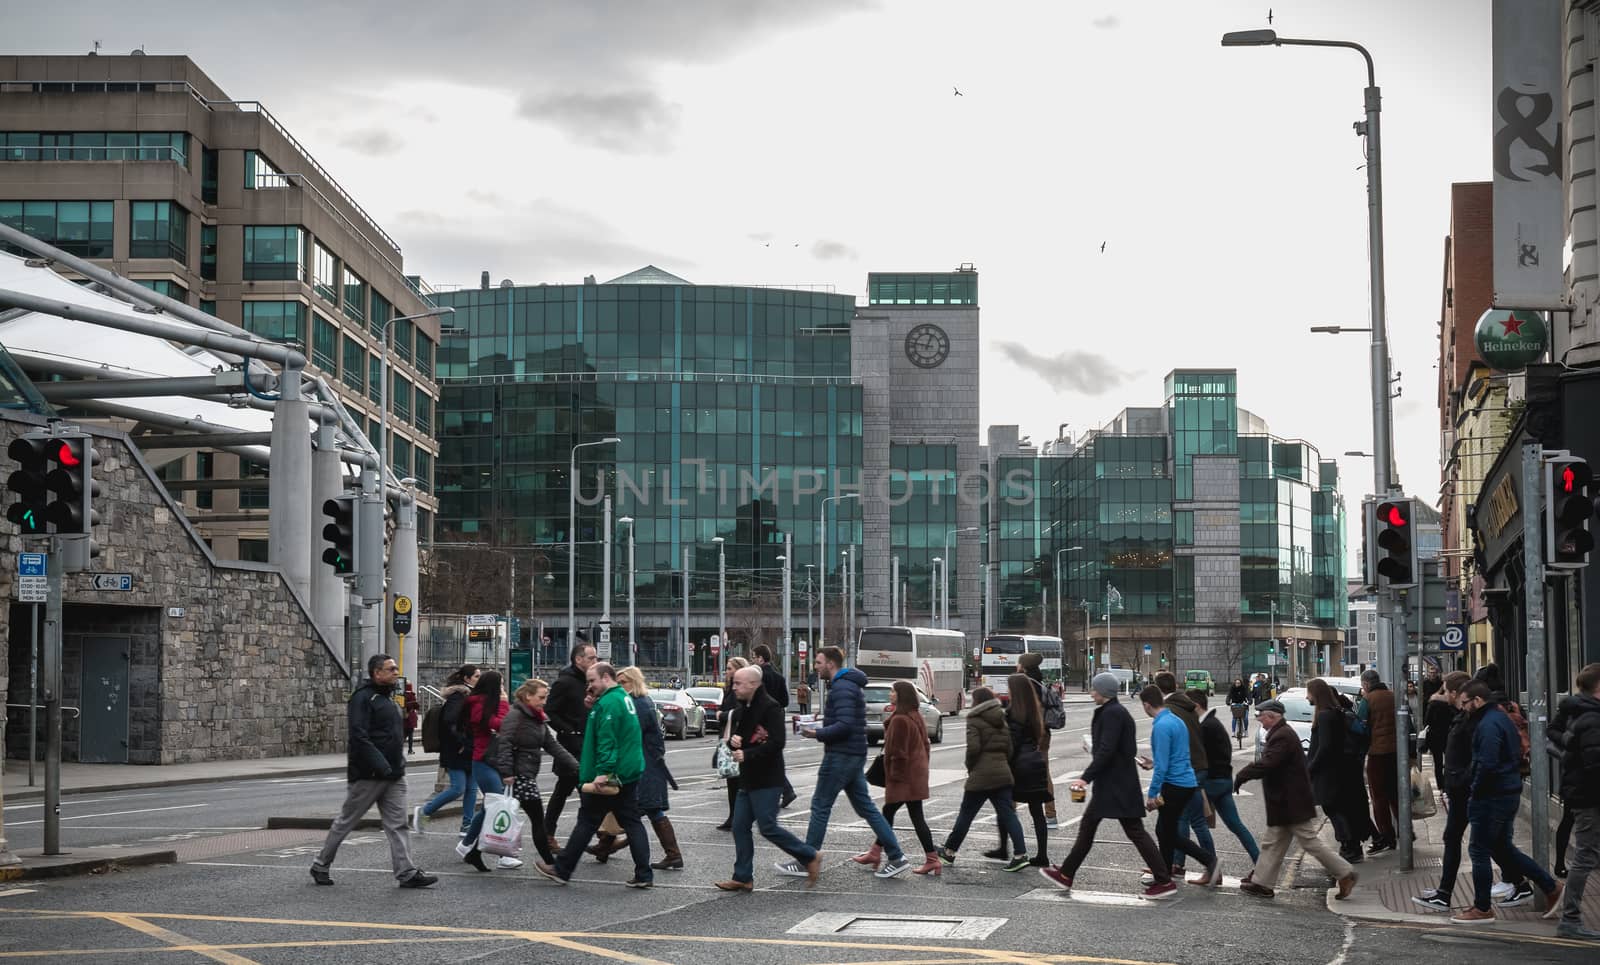 Dublin, Ireland - February 12, 2019: Group of many pedestrians crossing a crosswalk in the city center on a winter day